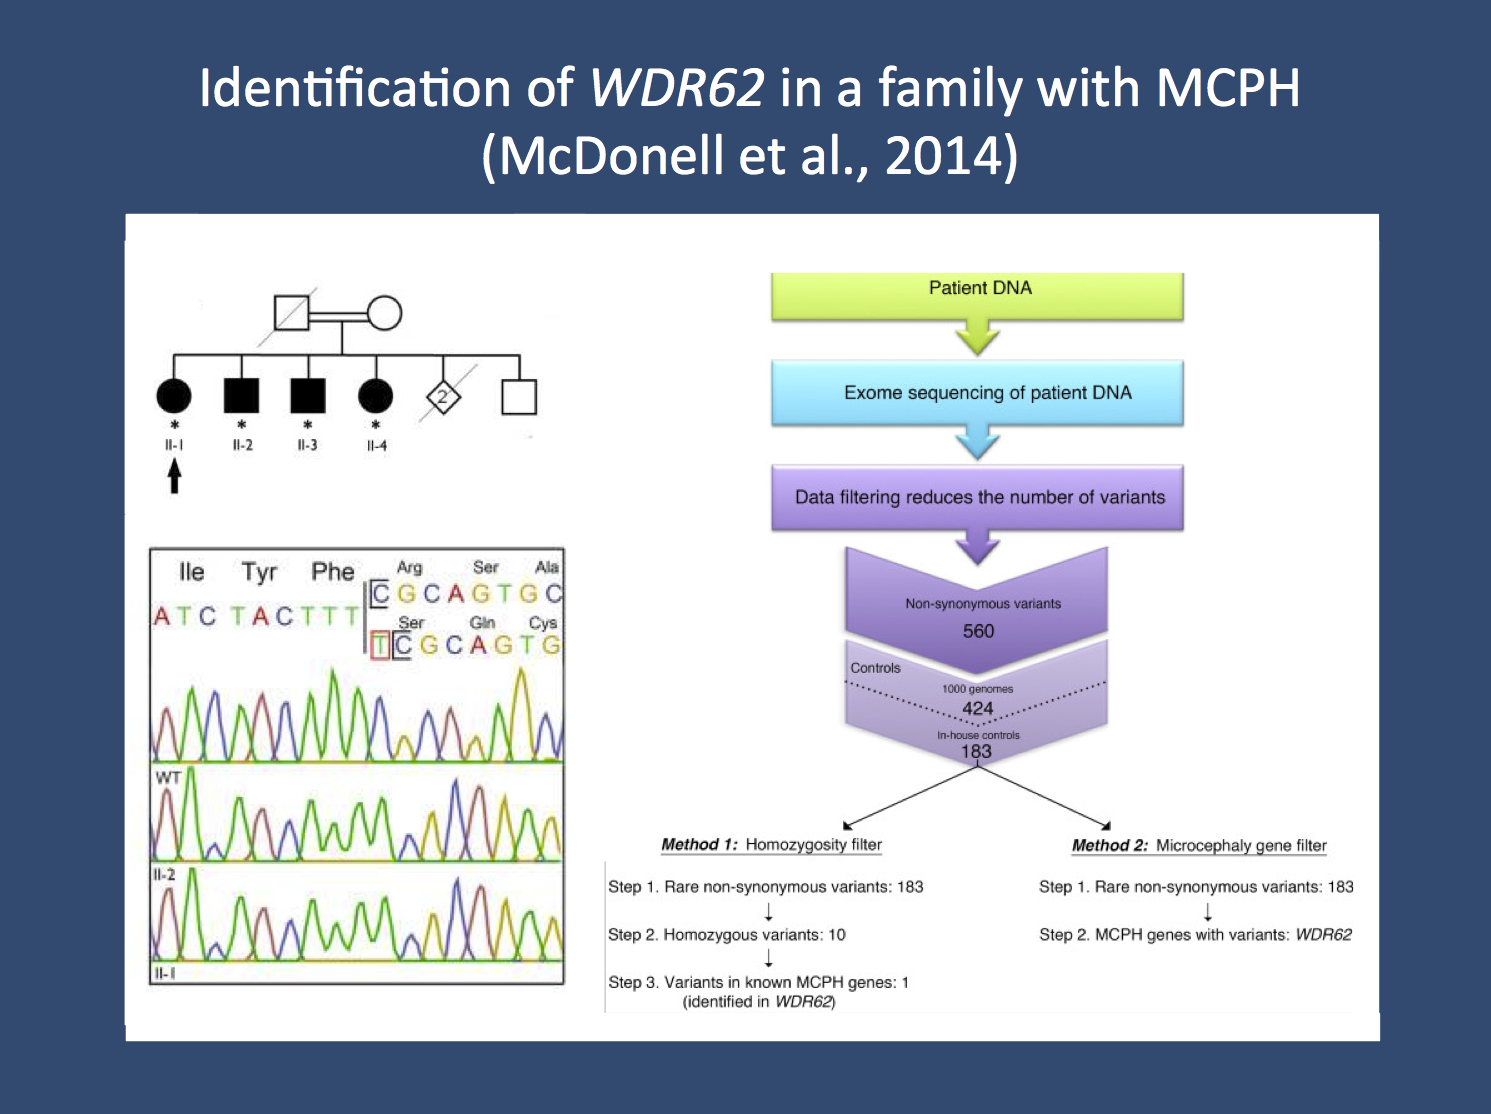 Analysis strategy in the publication by McDonell and collaborators. The researchers looked for the cause of the primary autosomal recessive microcephaly (MCPH) in a family with four affected siblings (upper left corner). They performed exome sequencing in one family member and used stringent filtering to zoom in on the culprit mutation, a homozygous single base pair insertion in WDR62 (right panel). This mutation was confirmed through Sanger sequencing (lower left panel). The figure was adapted from the open access publication by the authors under a creative commons licence. Source: http://www.biomedcentral.com/1471-2377/14/22)  